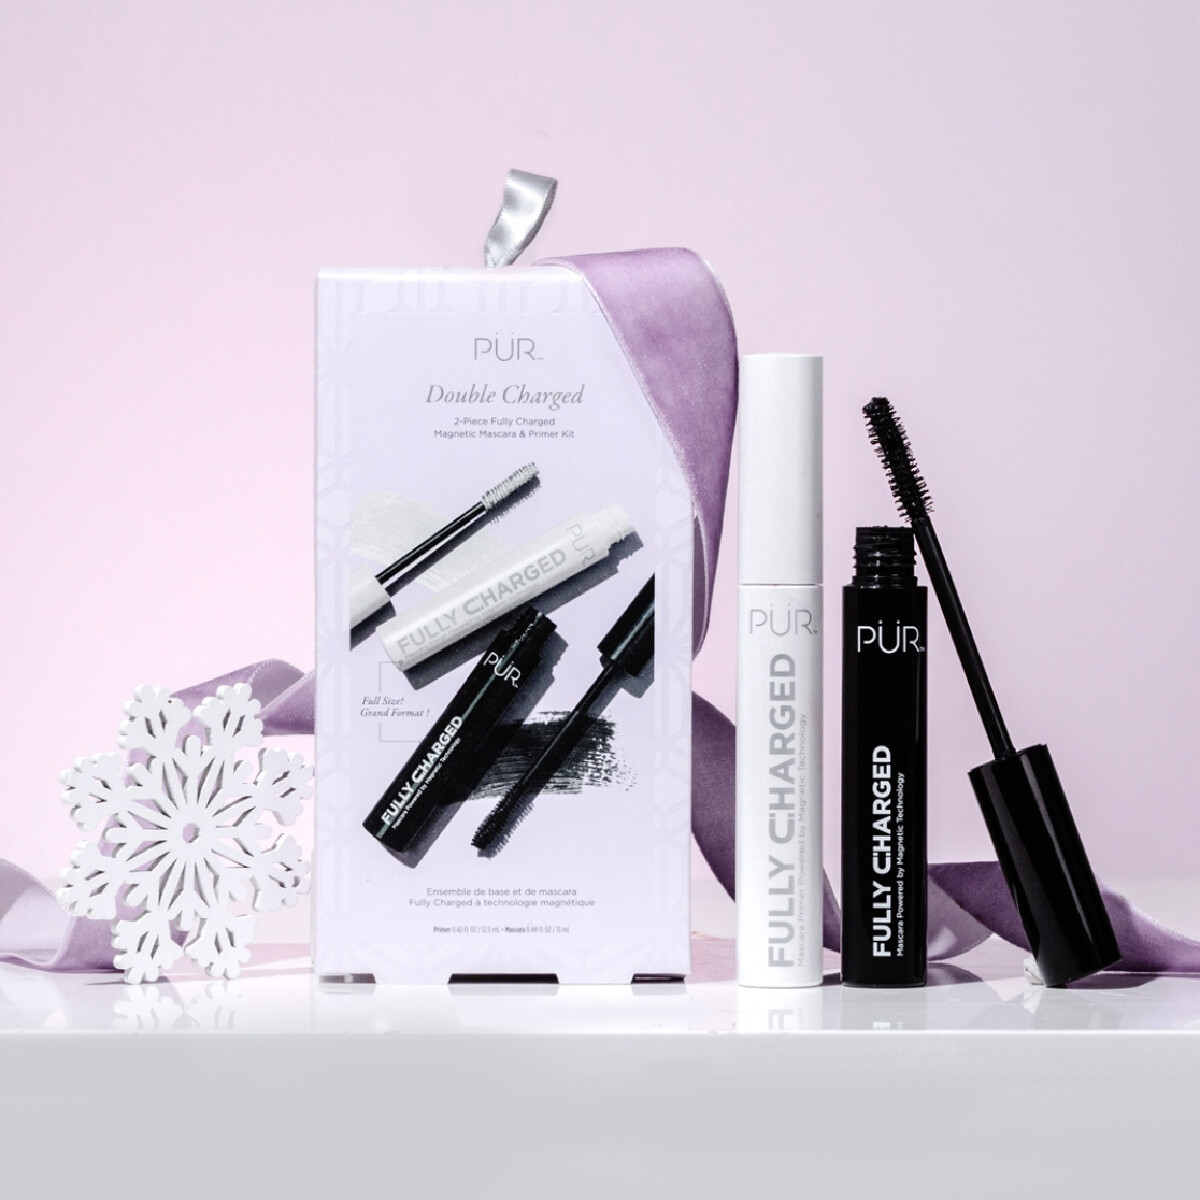 Pur Gift Set of Mascaras next to a white and black tube of Fully Charged Mascara against a light purple background with white snowflake.